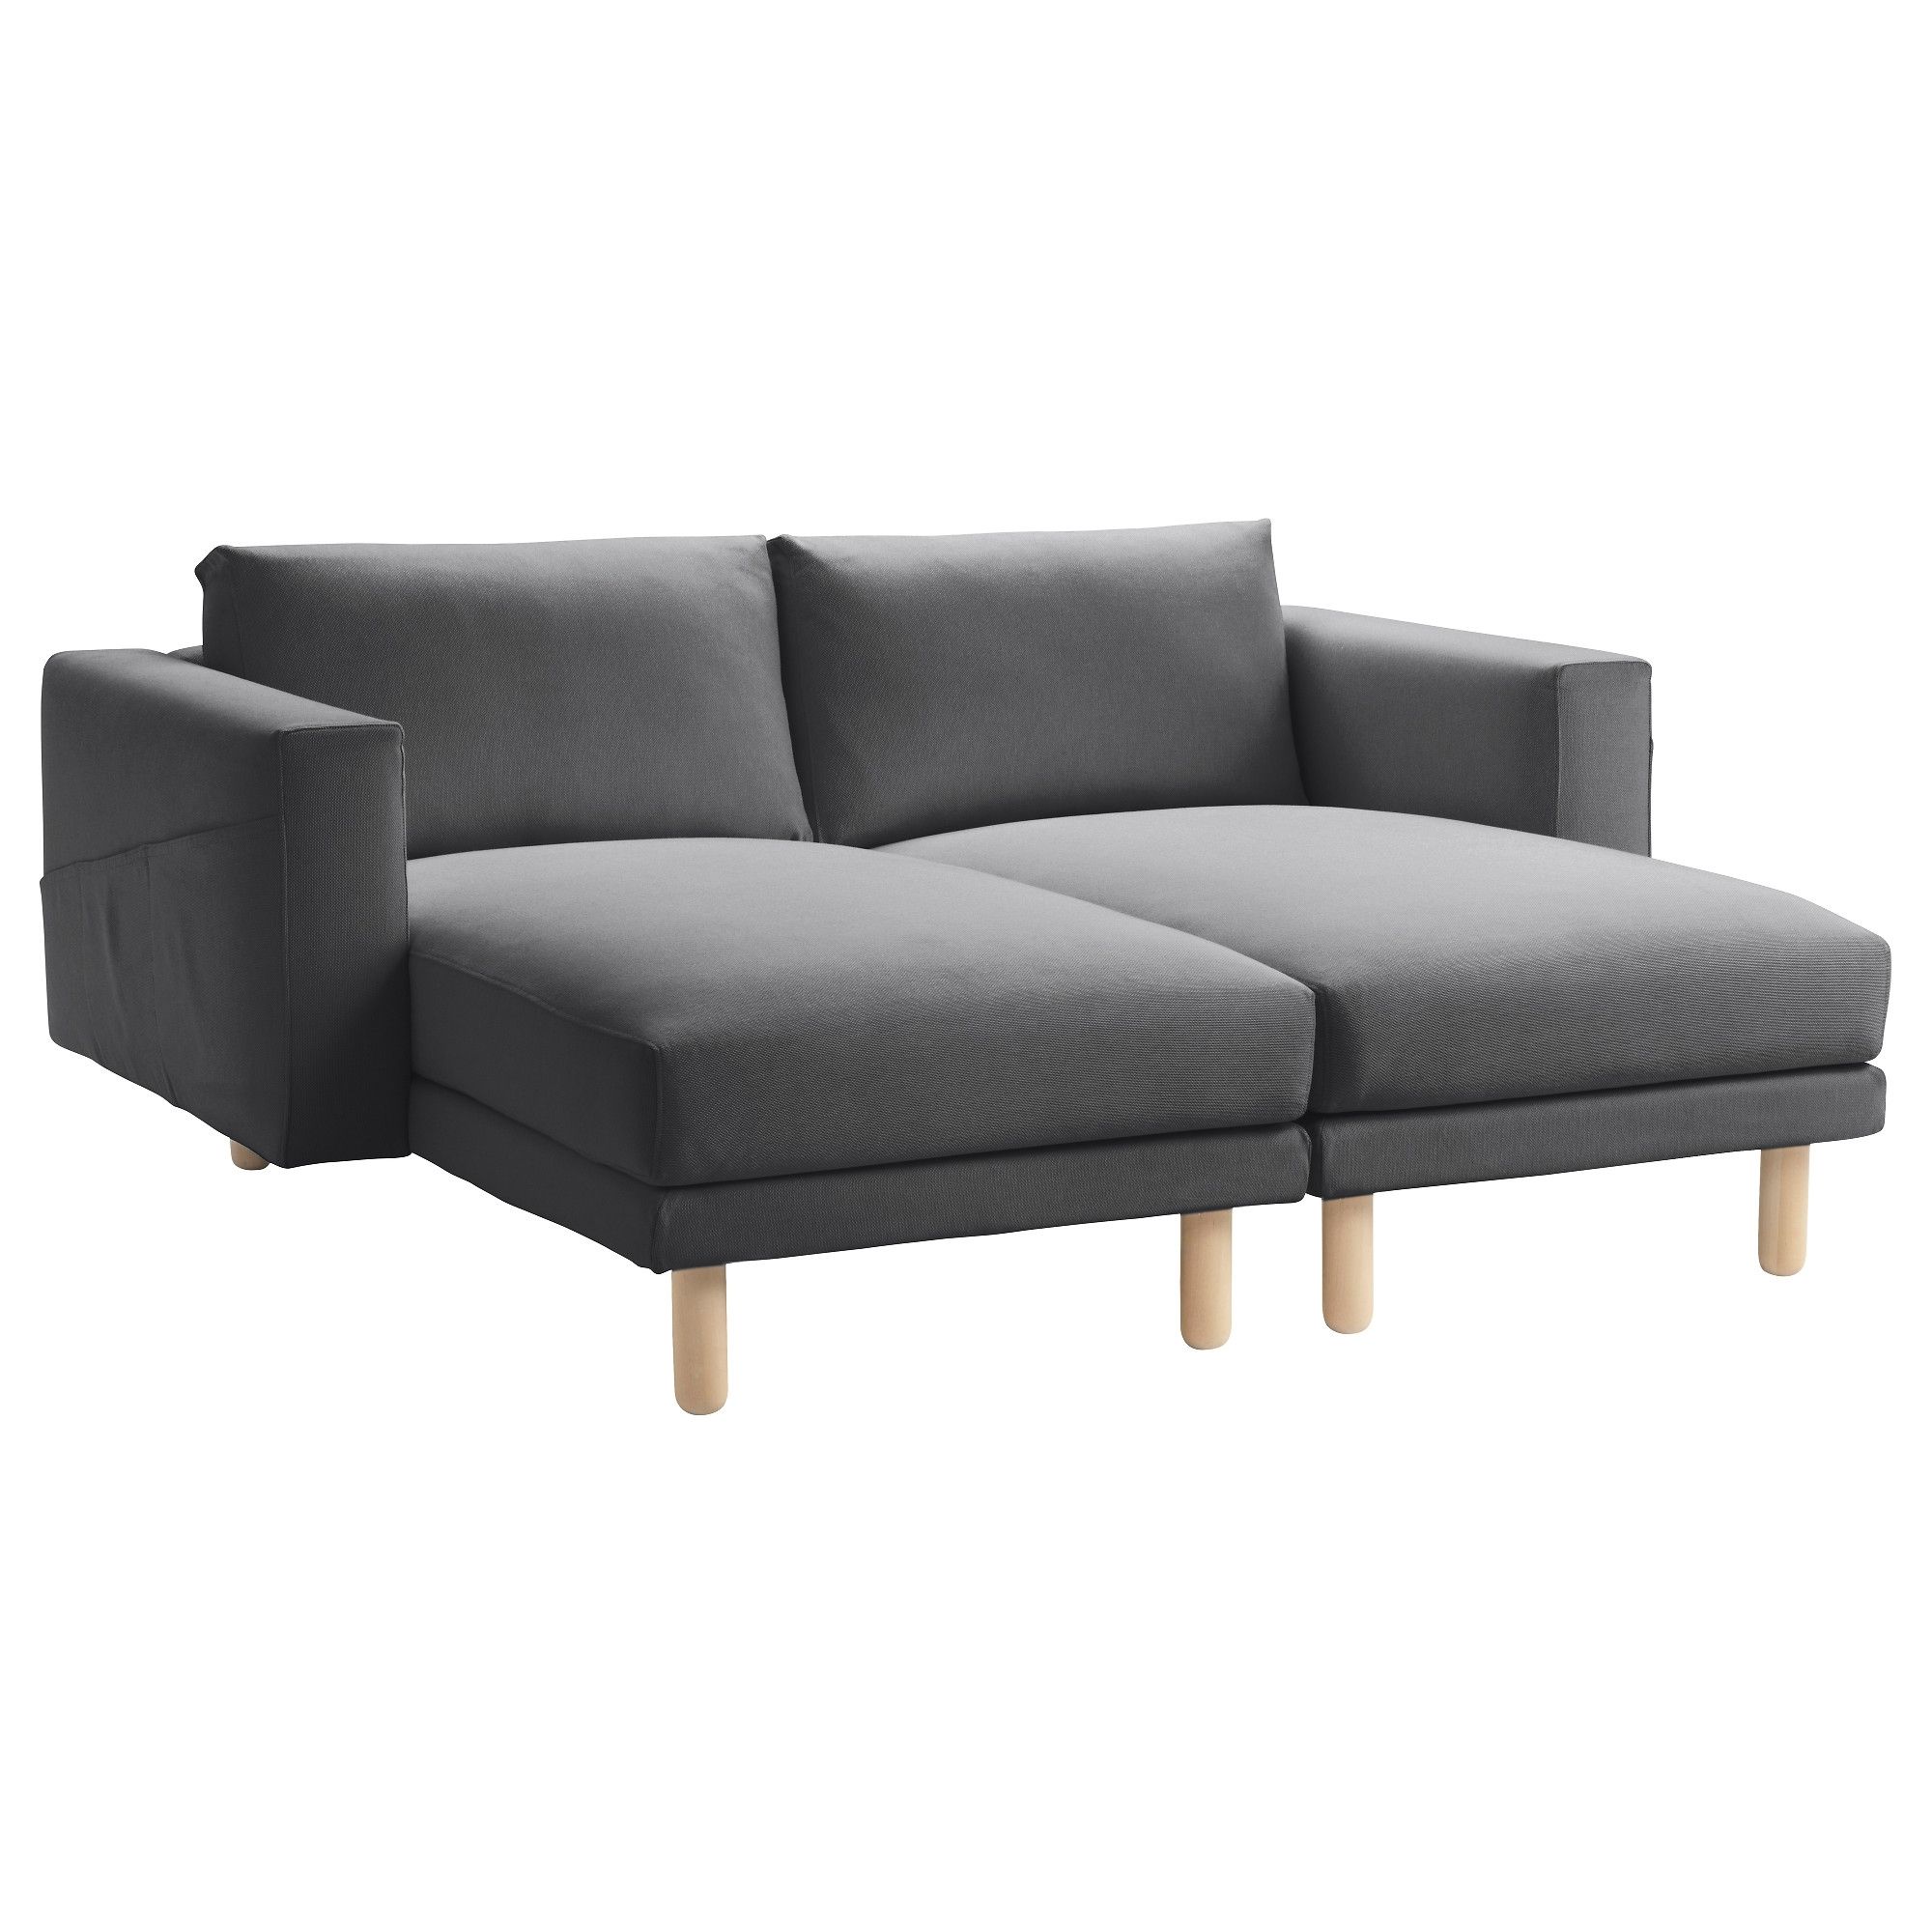 Most Popular Norsborg Sectional, 2 Seat – Finnsta Dark Gray – Ikea Within Ikea Chaise Lounge Chairs (View 6 of 15)